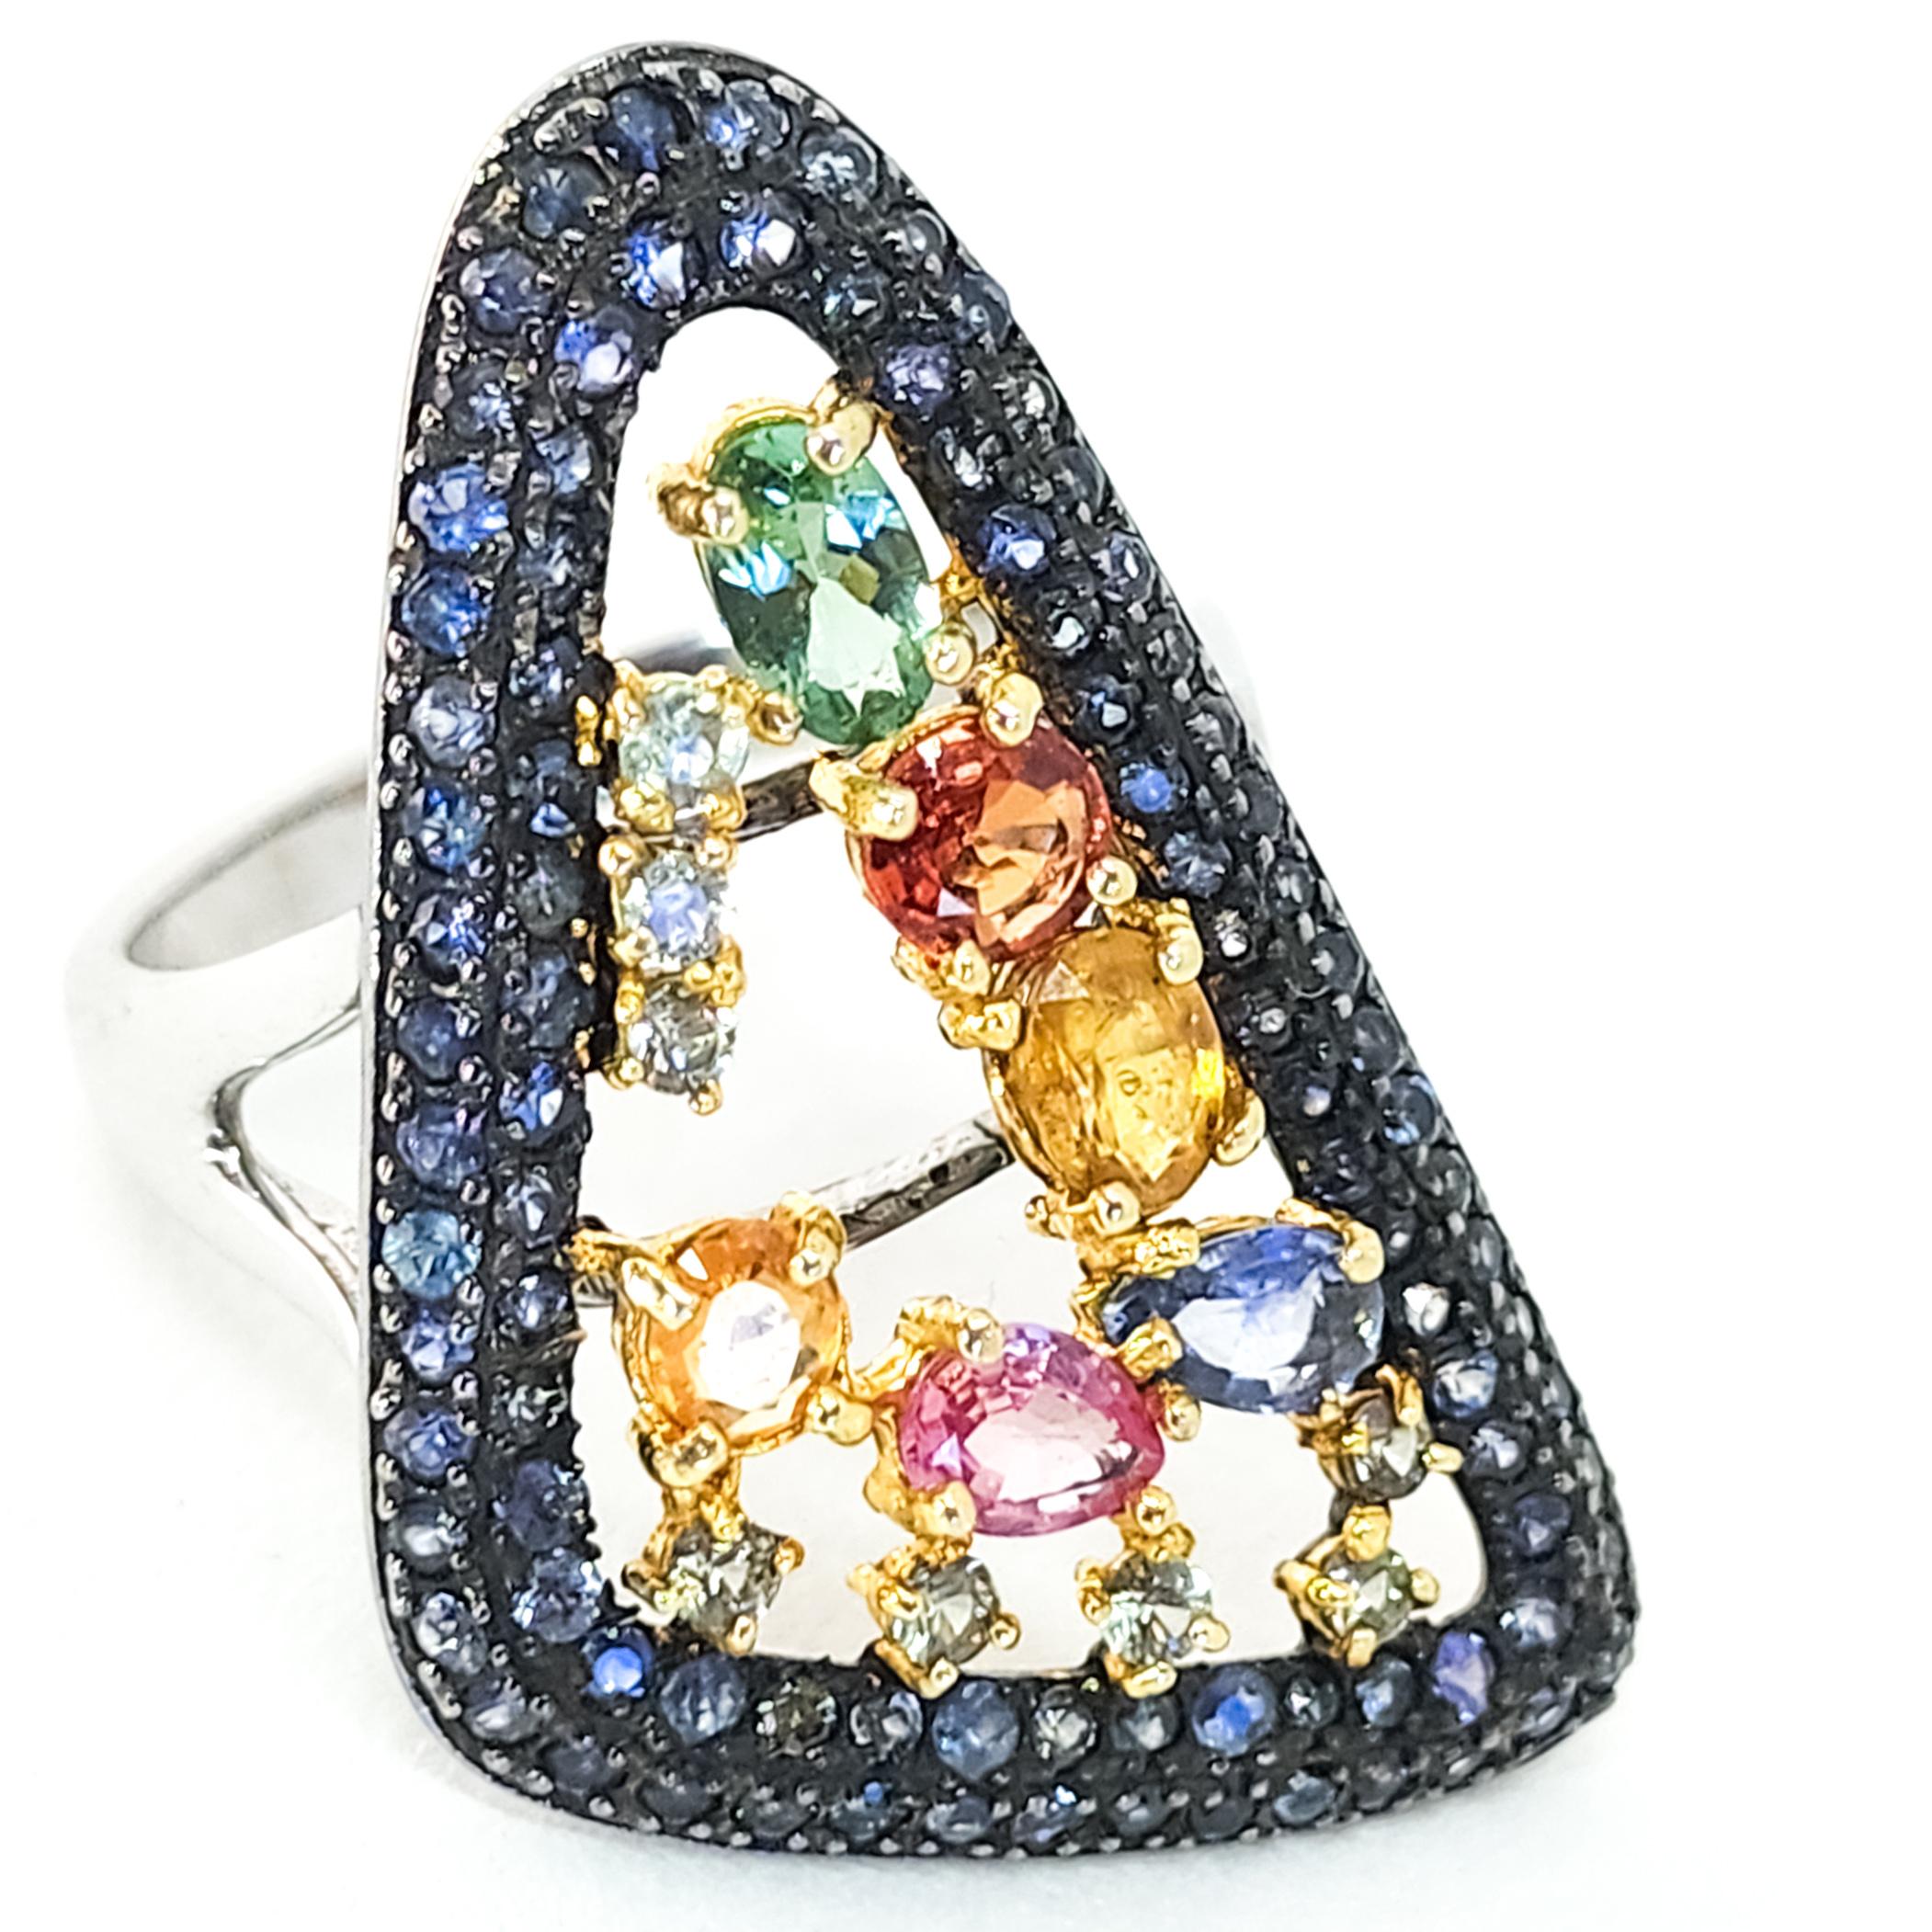 One large Cocktail, Cluster Ring featuring a Deliciously Sweet Confectionery of Colored Gemstones in Pinks, Blues, Yellows, Oranges and Purples and 2.85 carats total weight. This festive Ring is an appropriate accent for all seasons wear.  The Large